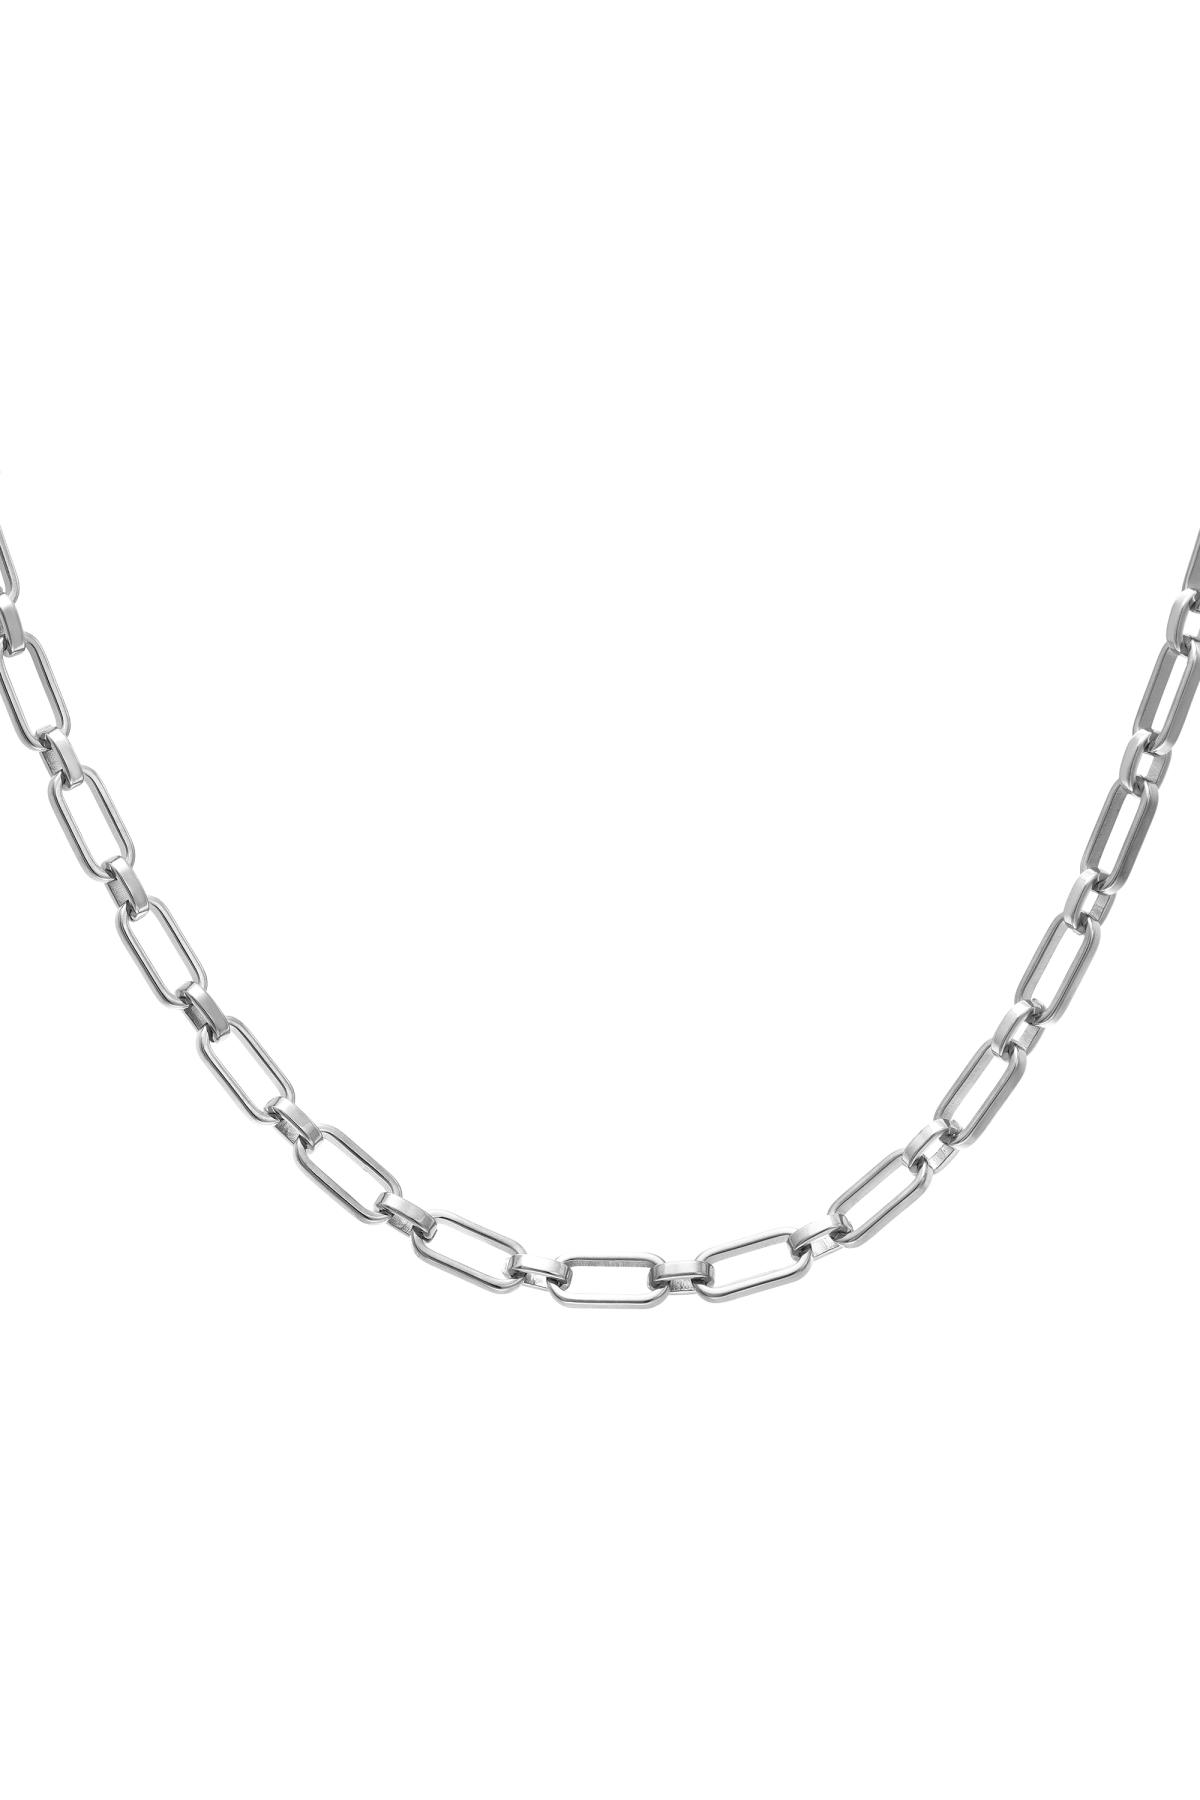 Statement necklace stainless steel Silver